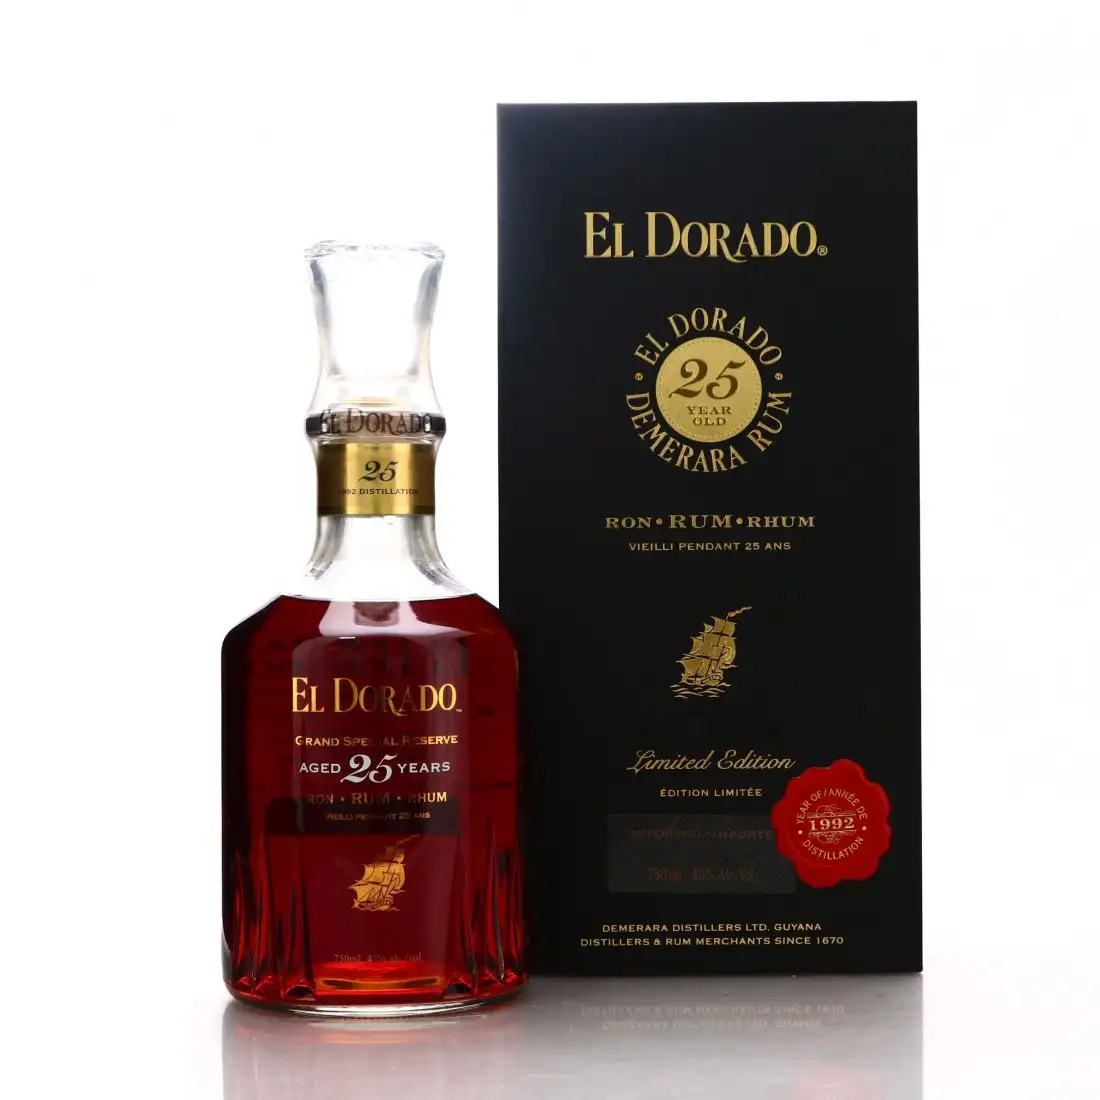 Image of the front of the bottle of the rum El Dorado Grand Special Reserve